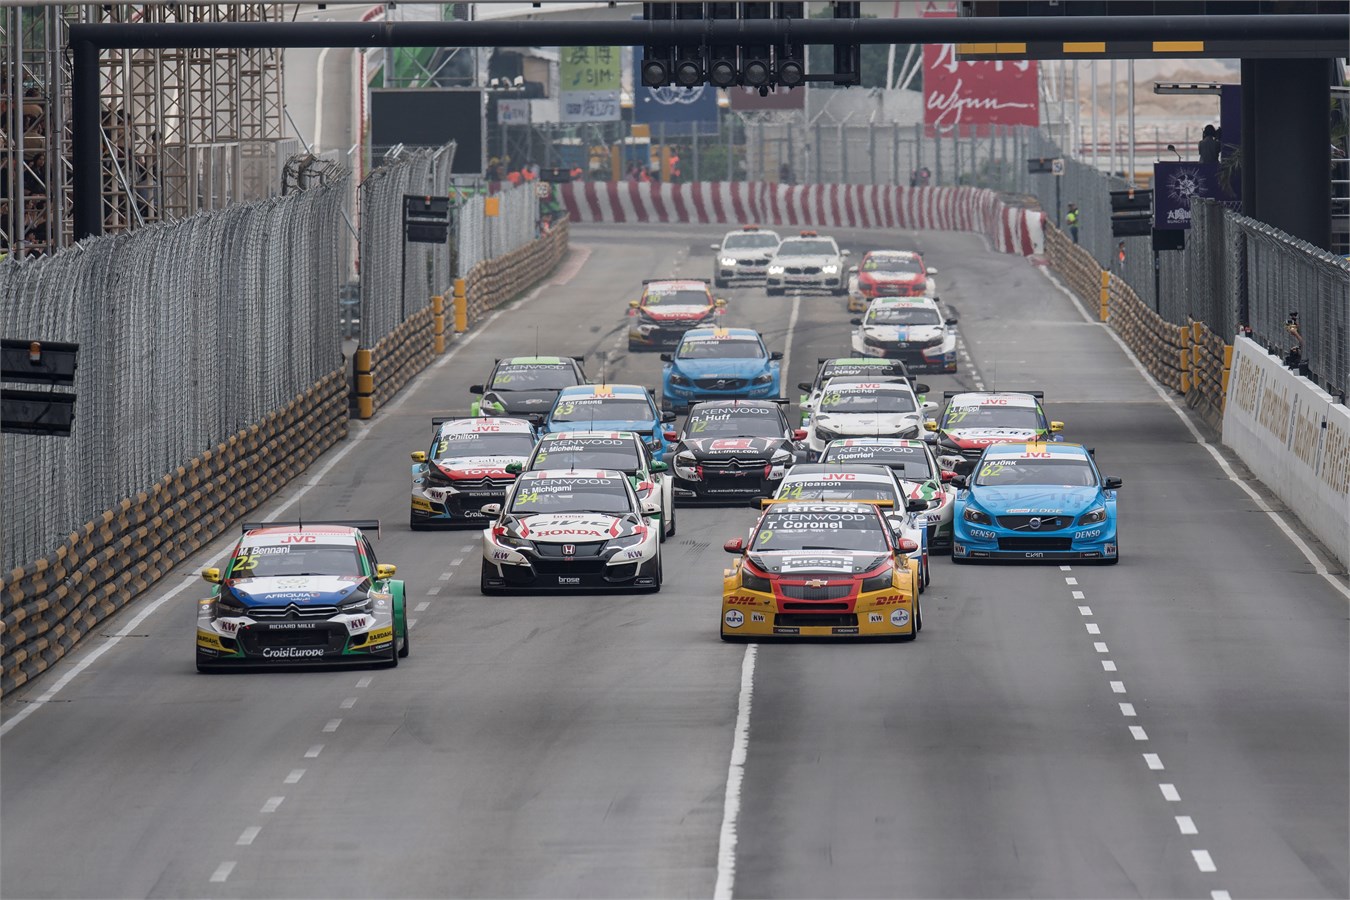 Thed Björk extends World Championship lead after first Macau street race